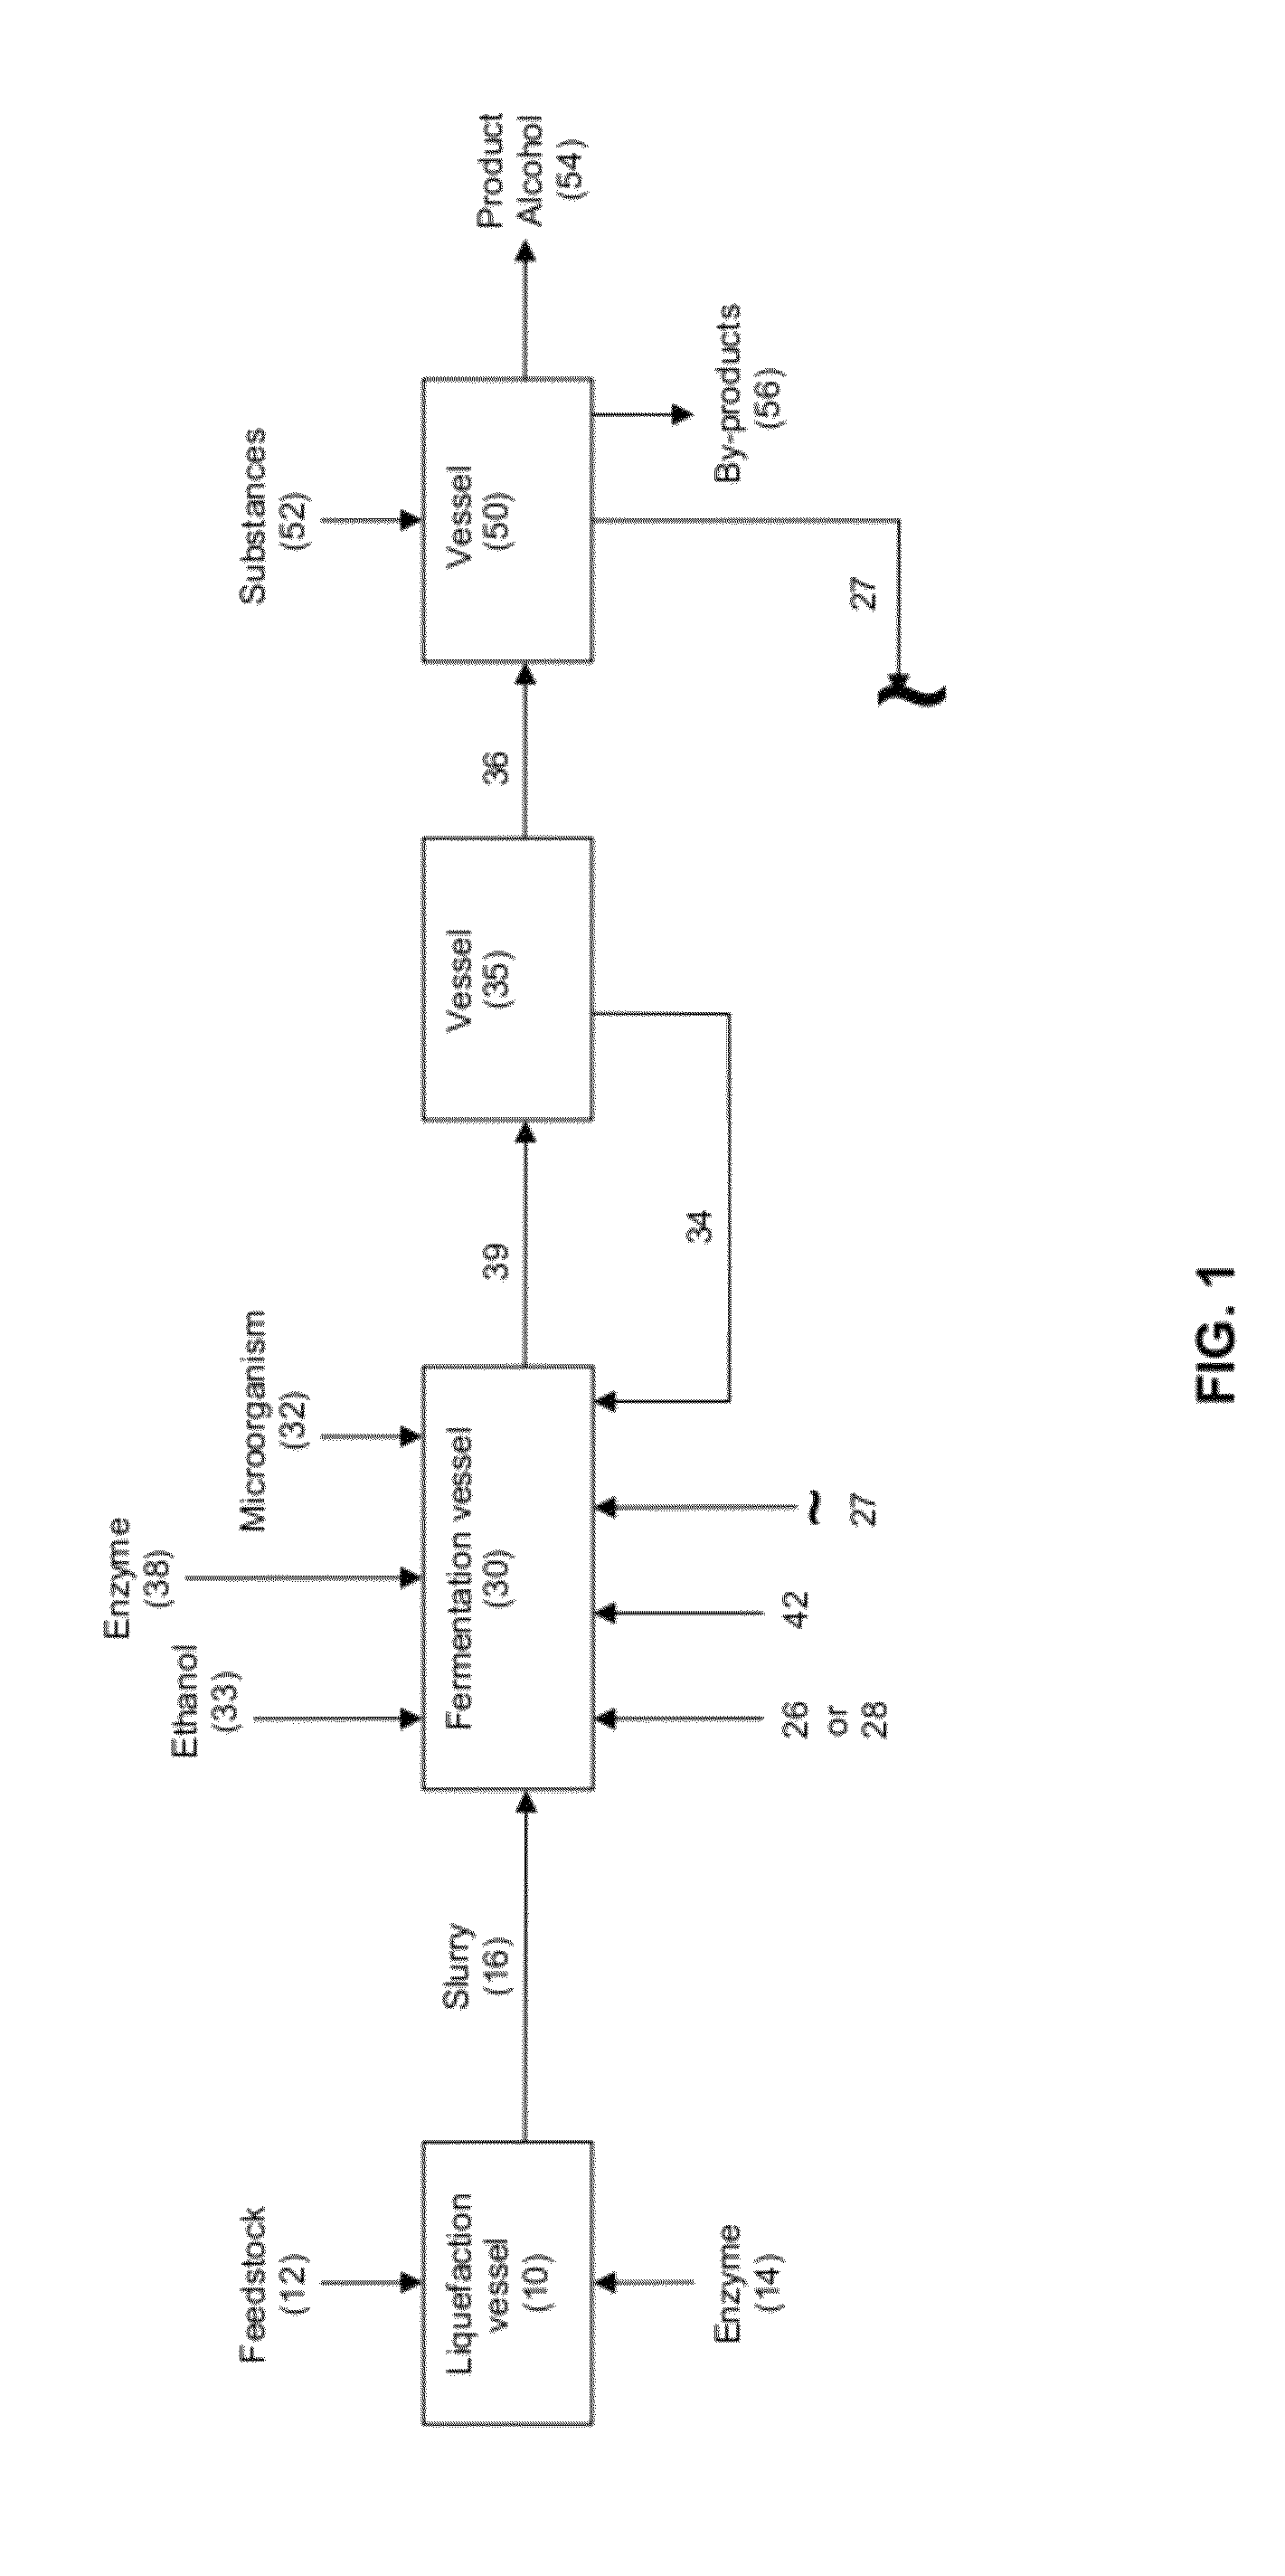 Production of alcohol esters and in situ product removal during alcohol fermentation